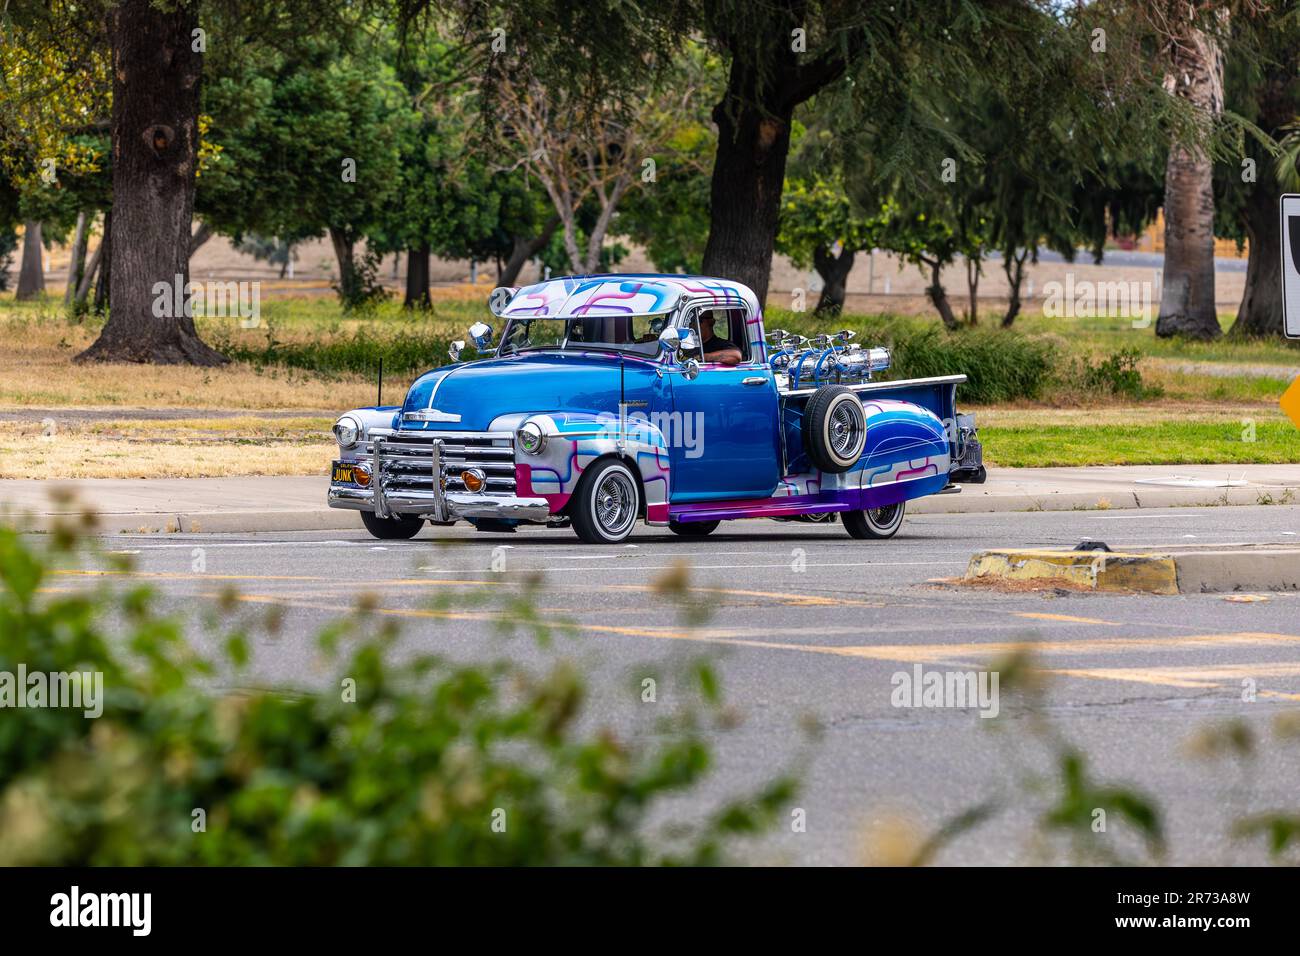 An early 1950's Chevy Truck at the North Modesto Kiwanis American Graffiti Car Show & Festival Stock Photo